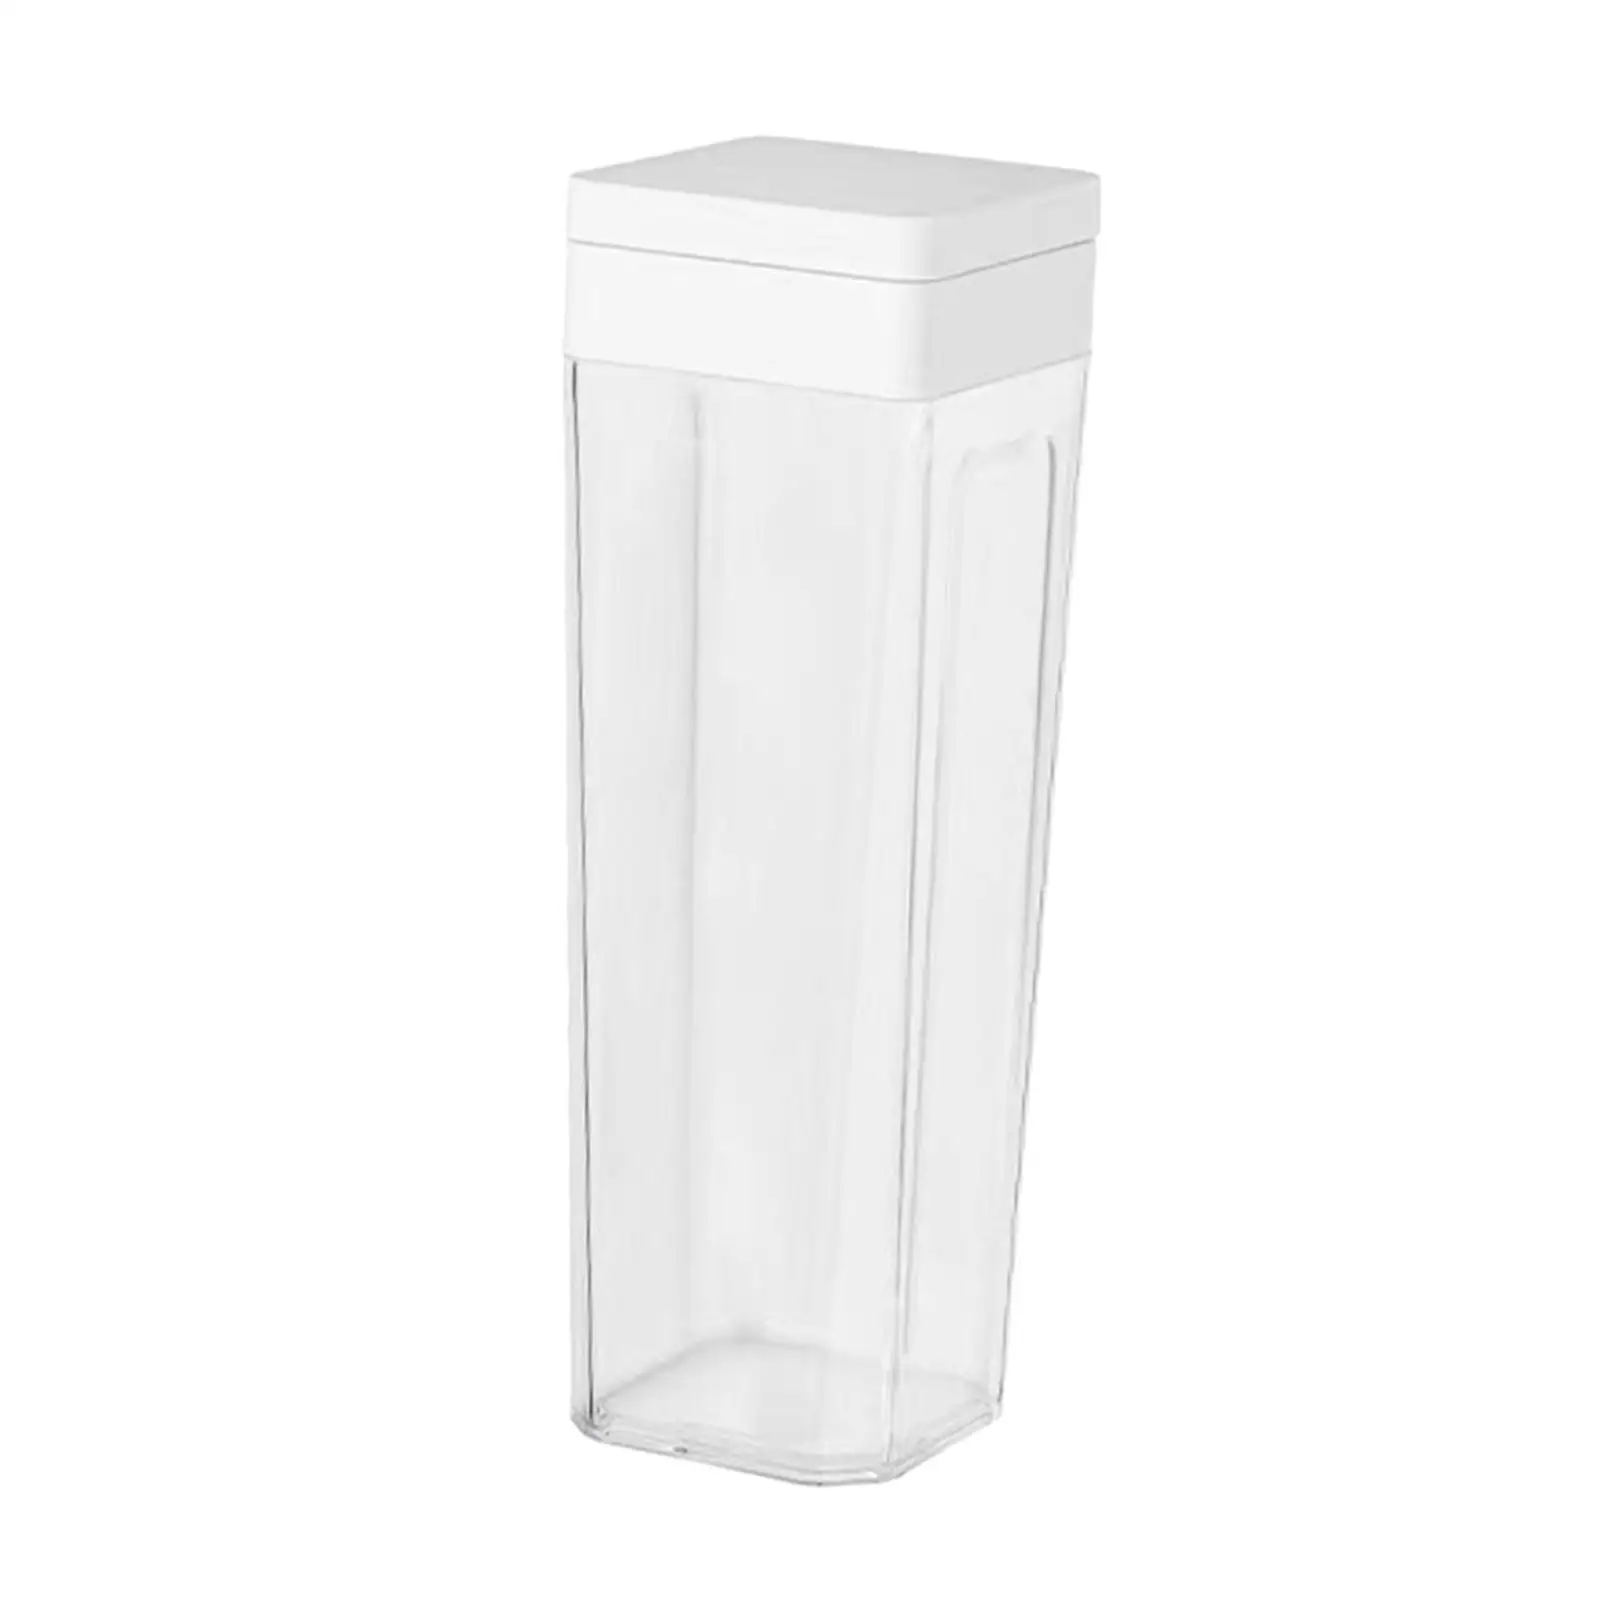 Square Cereal Dispenser Airtight Lid Easily Cleaning Clear Food Storage Container for Freezer Pet Food Grains Coffee Bean